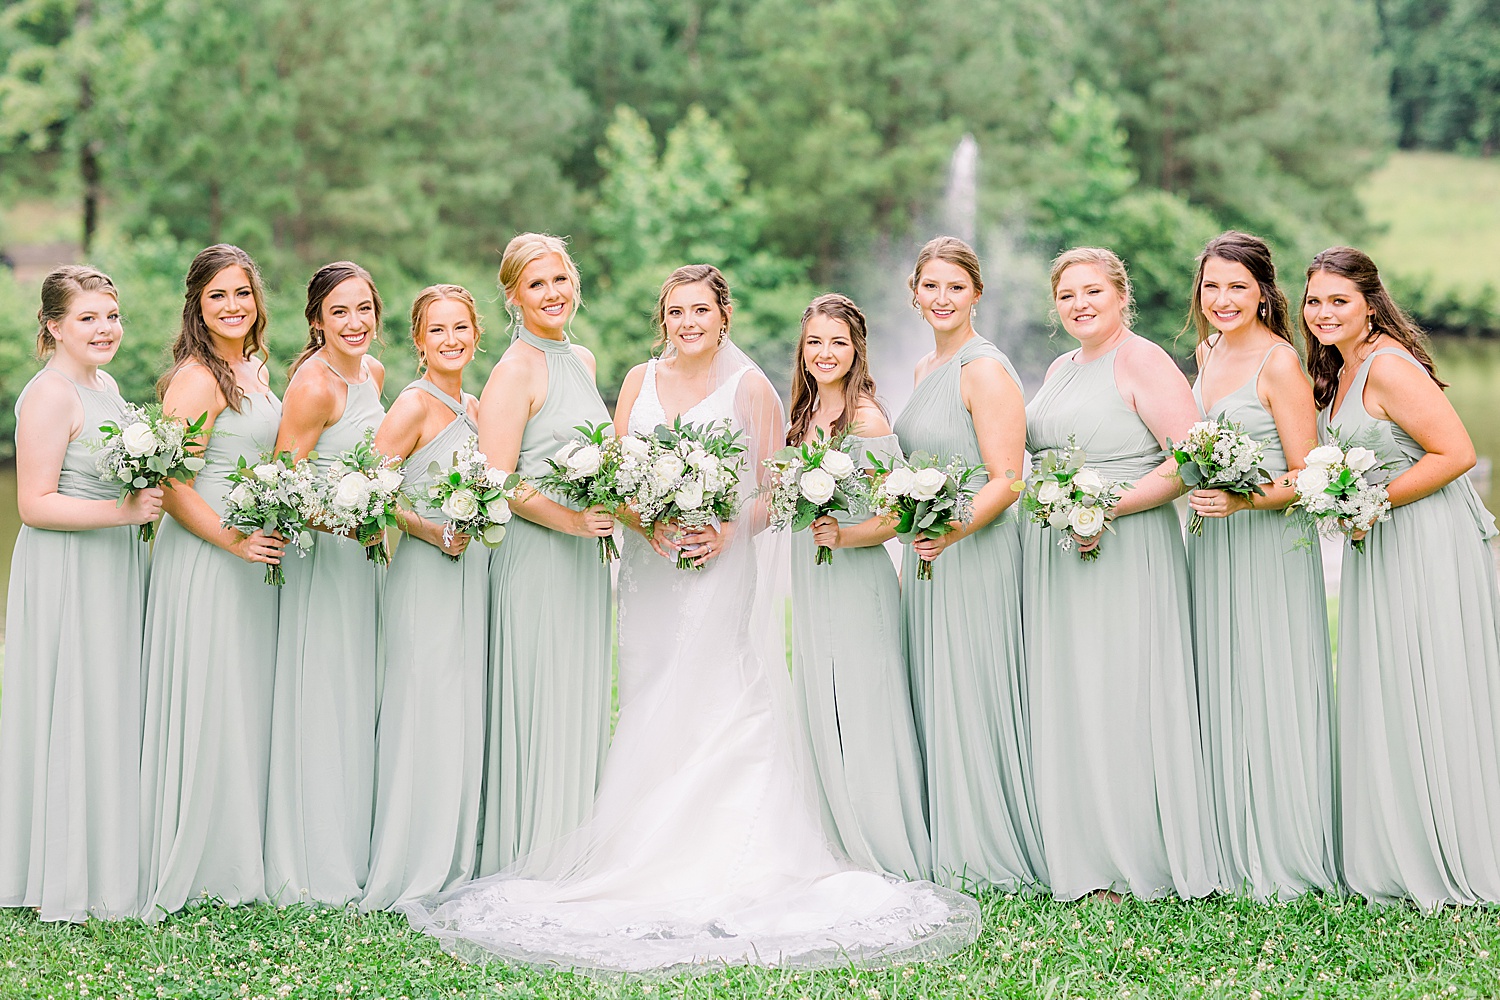 Bridal party at Belle Farms in Sterrett AL before wedding ceremony